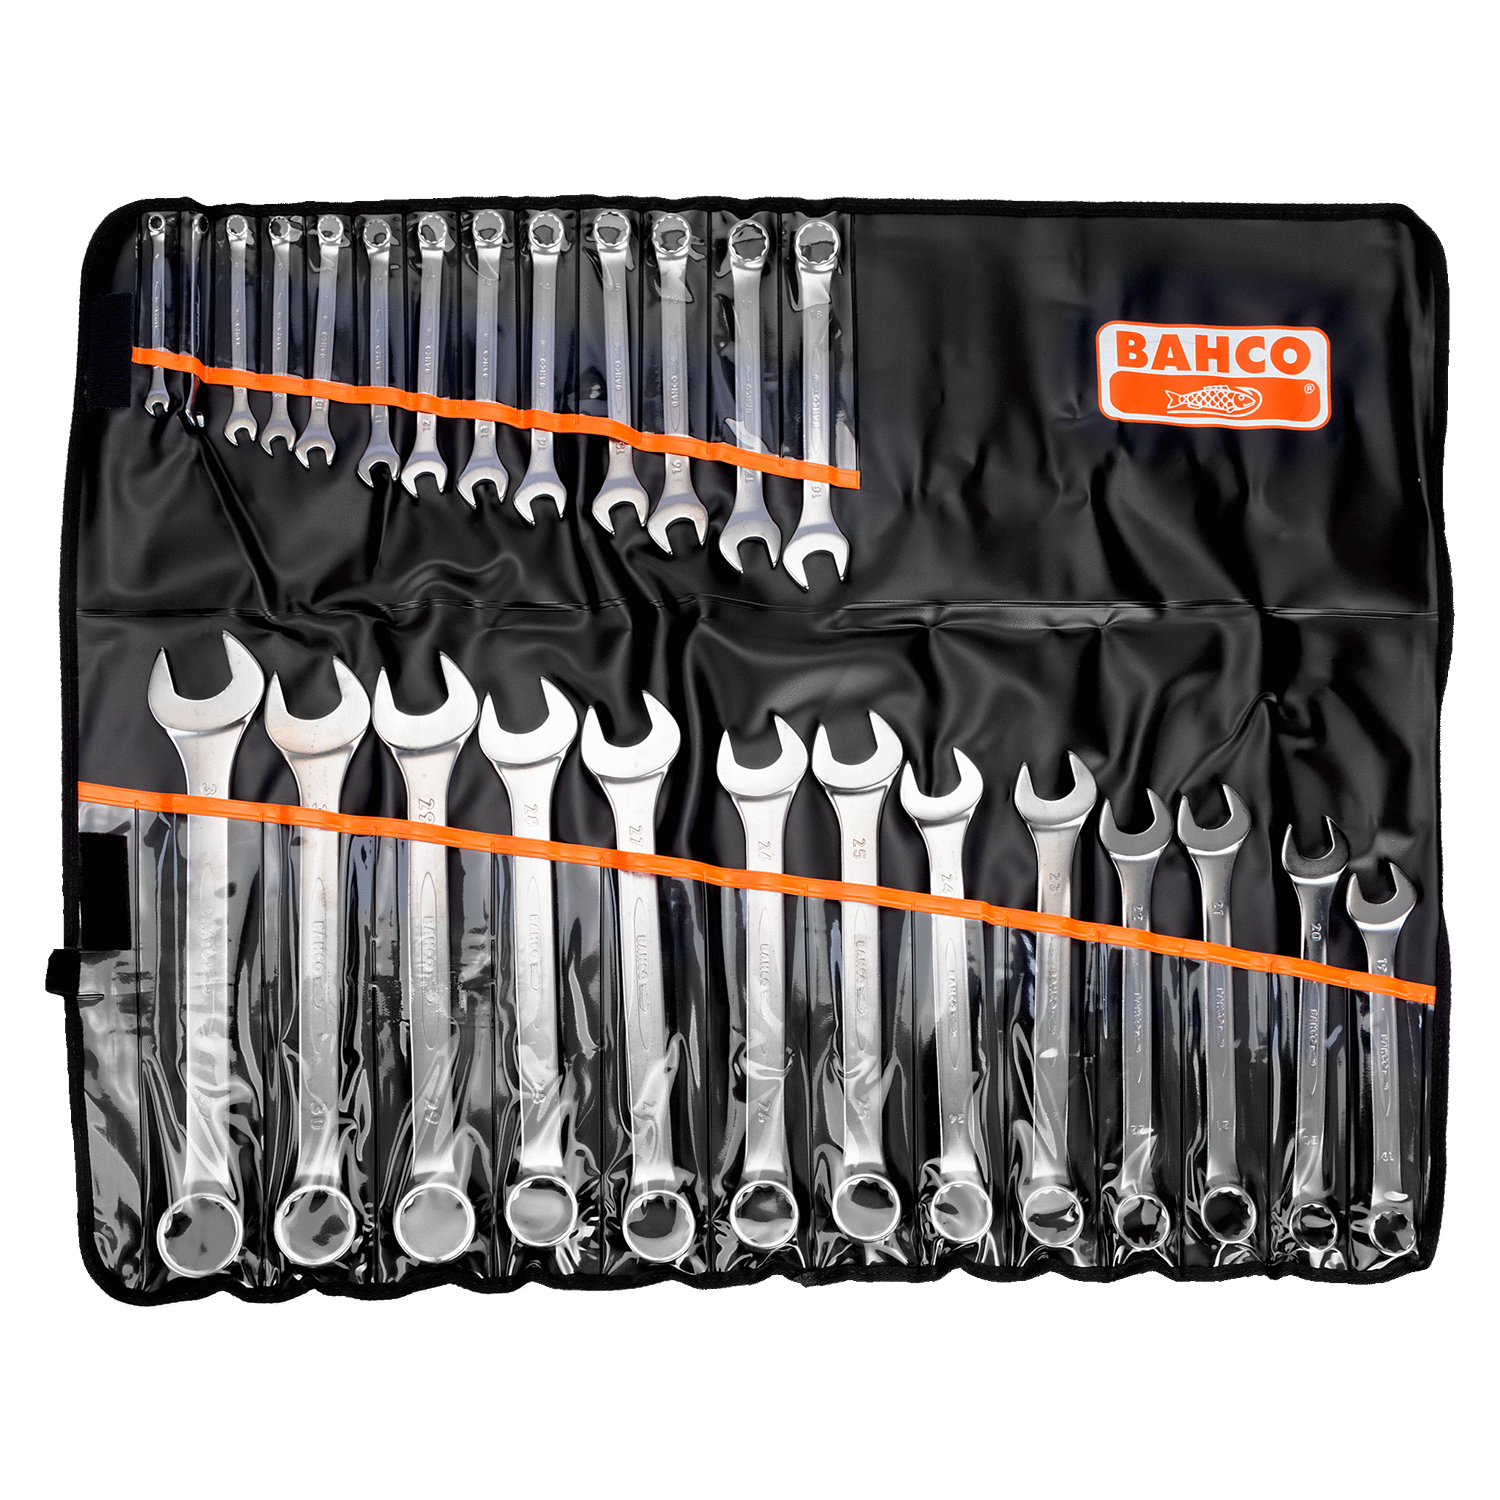 BAHCO 111M/26T Metric Flat Combination Wrench Set - 26 Pcs - Premium Flat Combination Wrench Set from BAHCO - Shop now at Yew Aik.